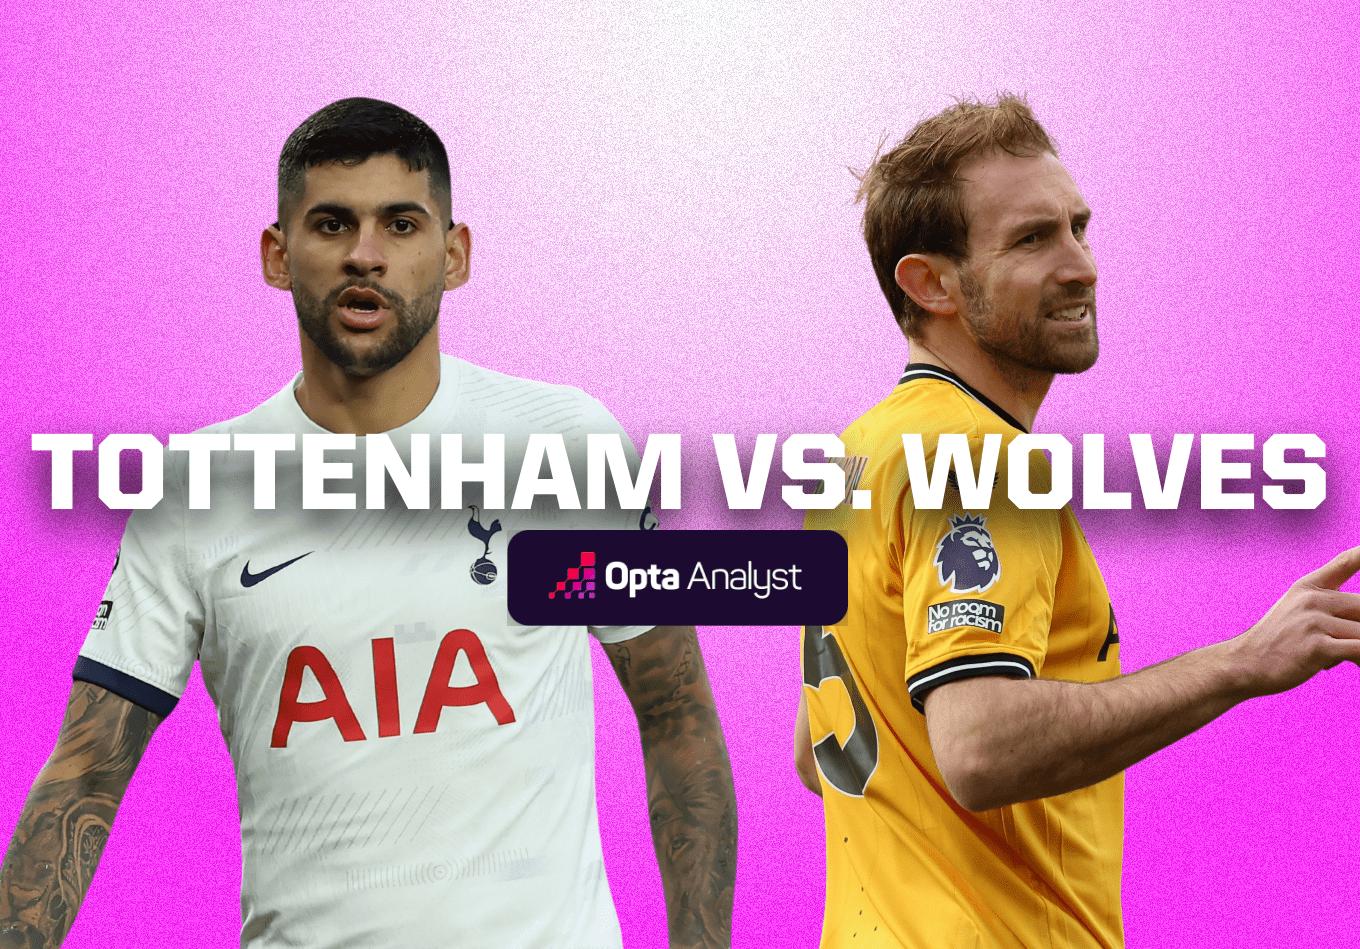 Tottenham vs Wolves: Prediction and Preview